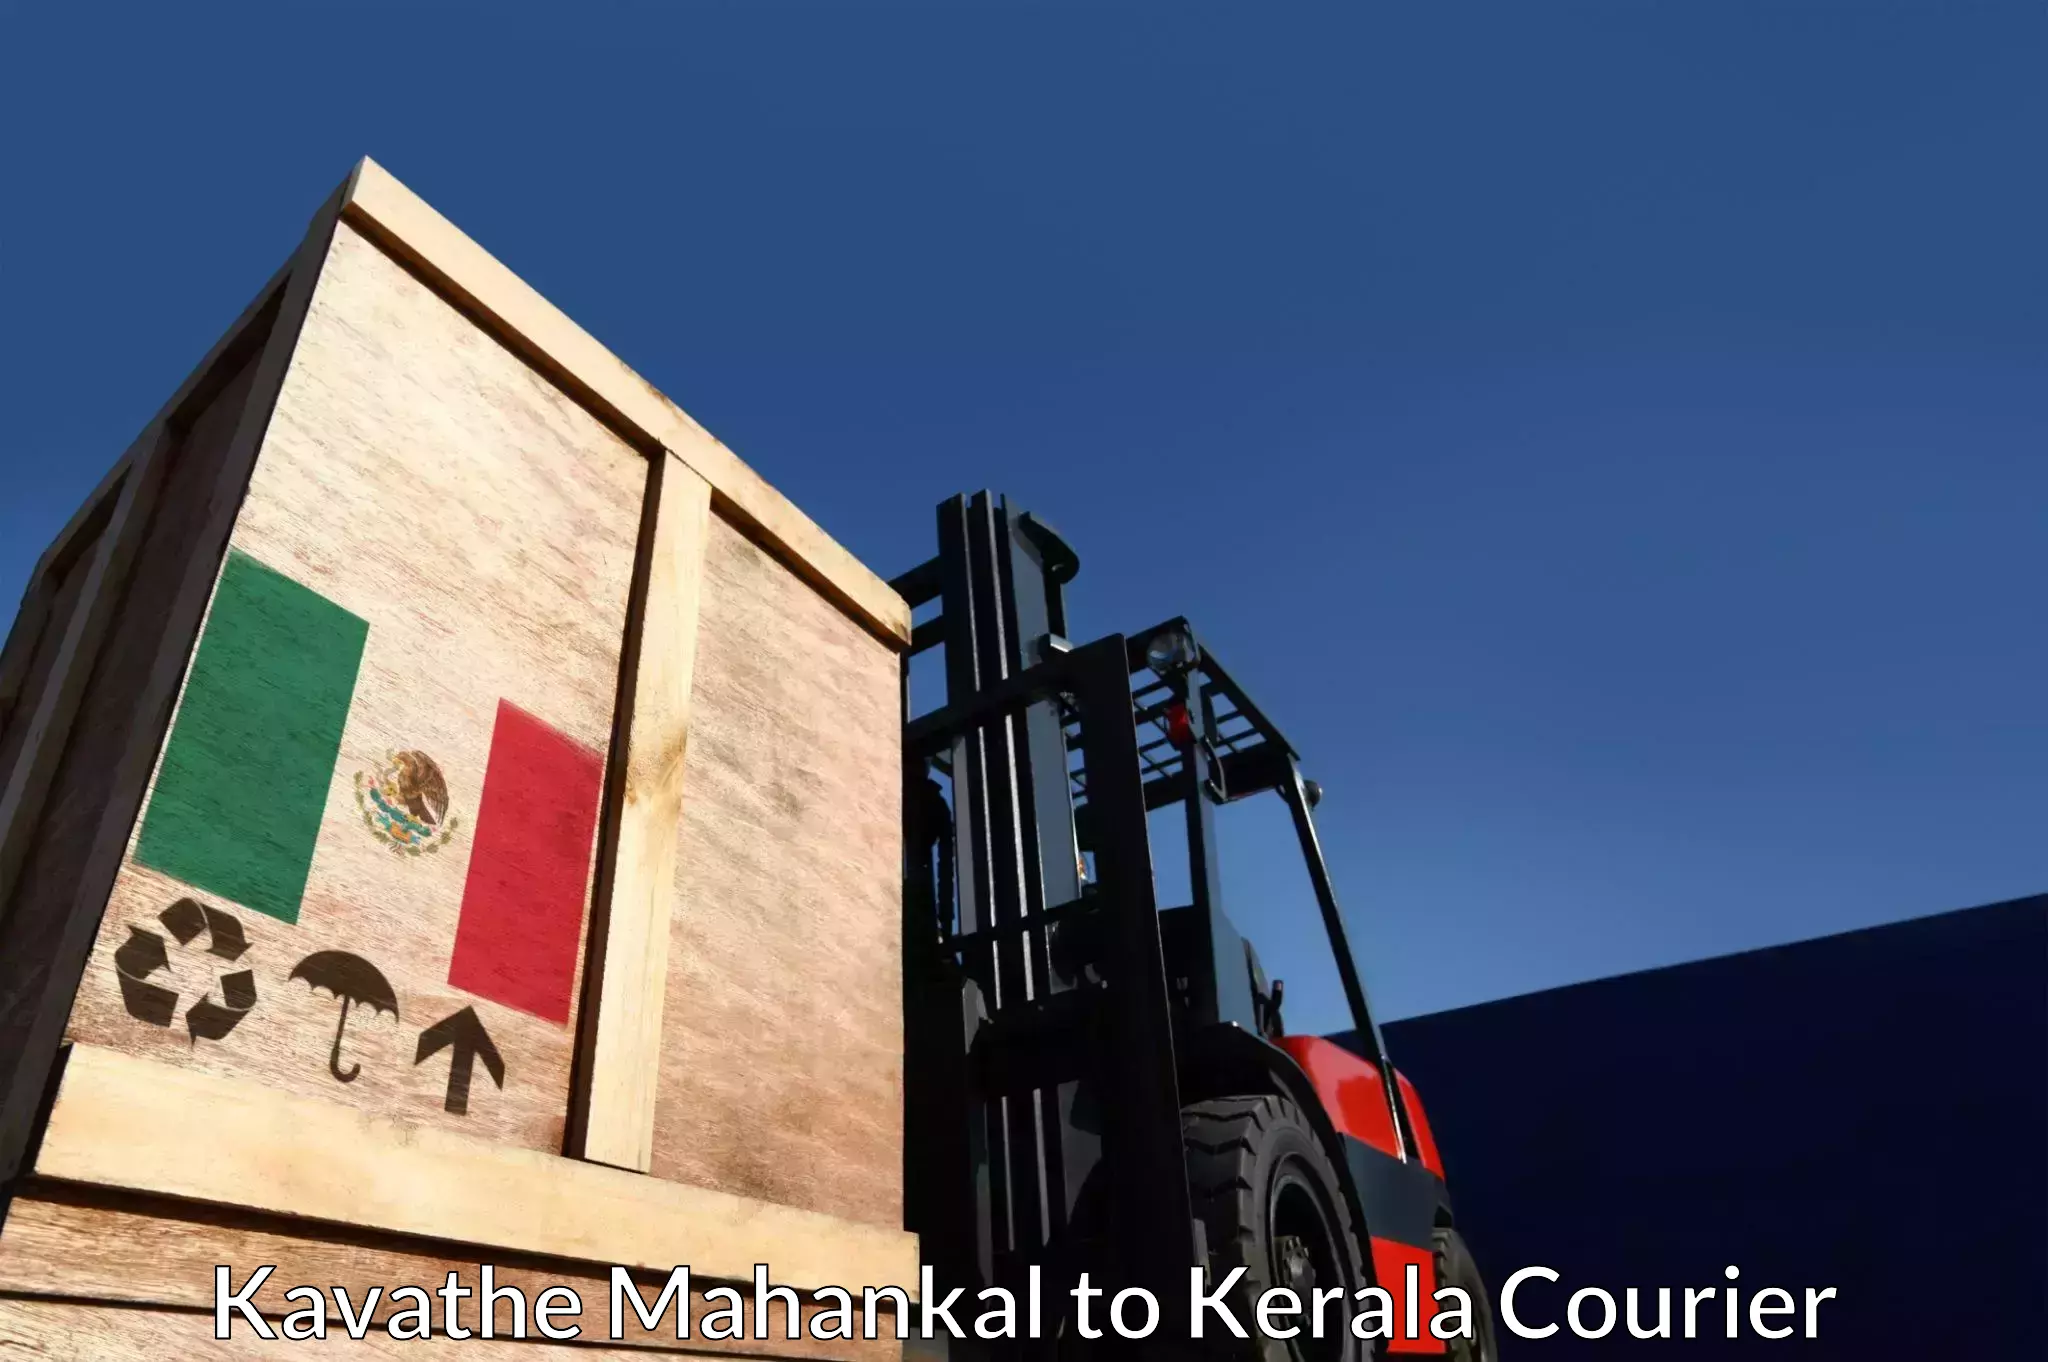 Parcel delivery automation Kavathe Mahankal to Cochin Port Kochi